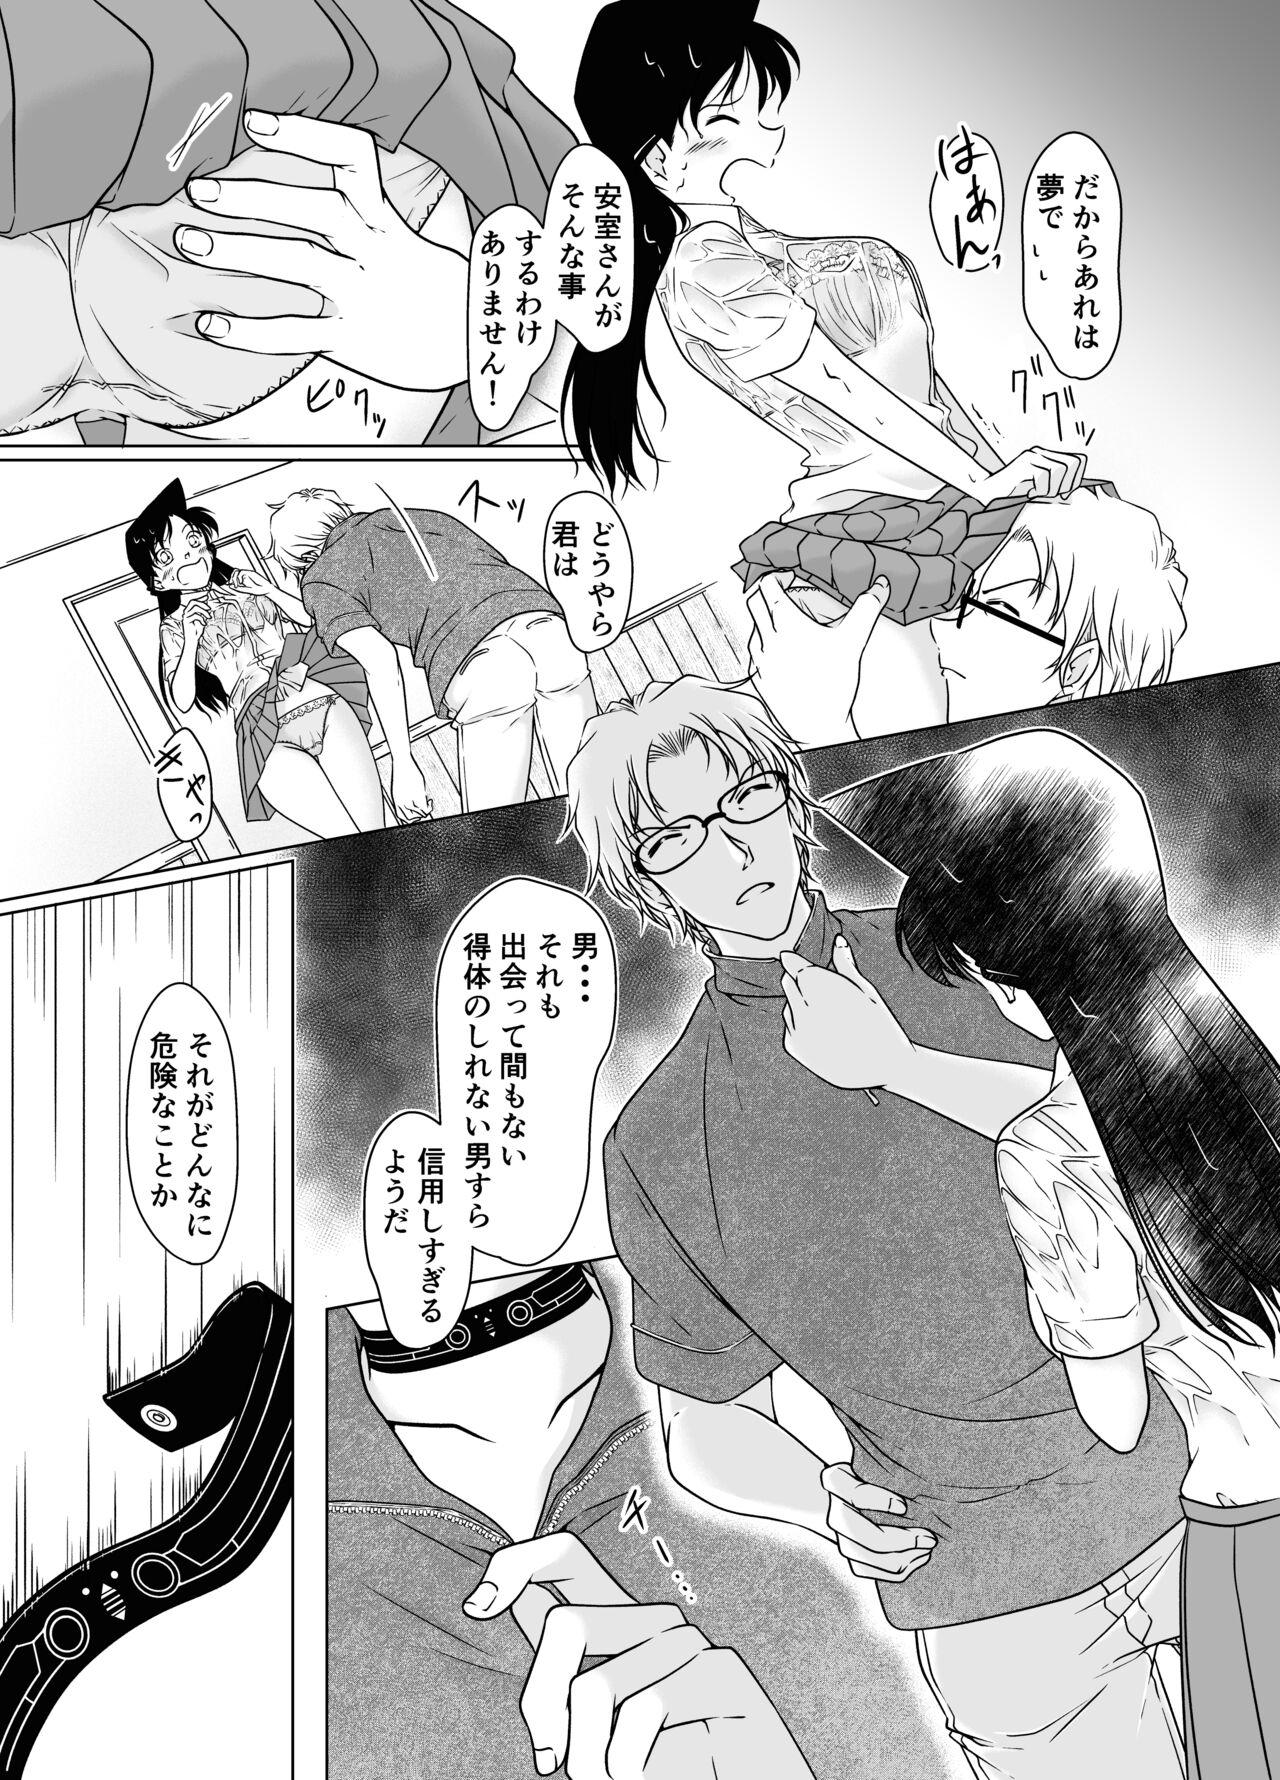 Cuckold 【Detective Conan】Something is wrong in the afternoon - Detective conan | meitantei conan Sola - Page 10